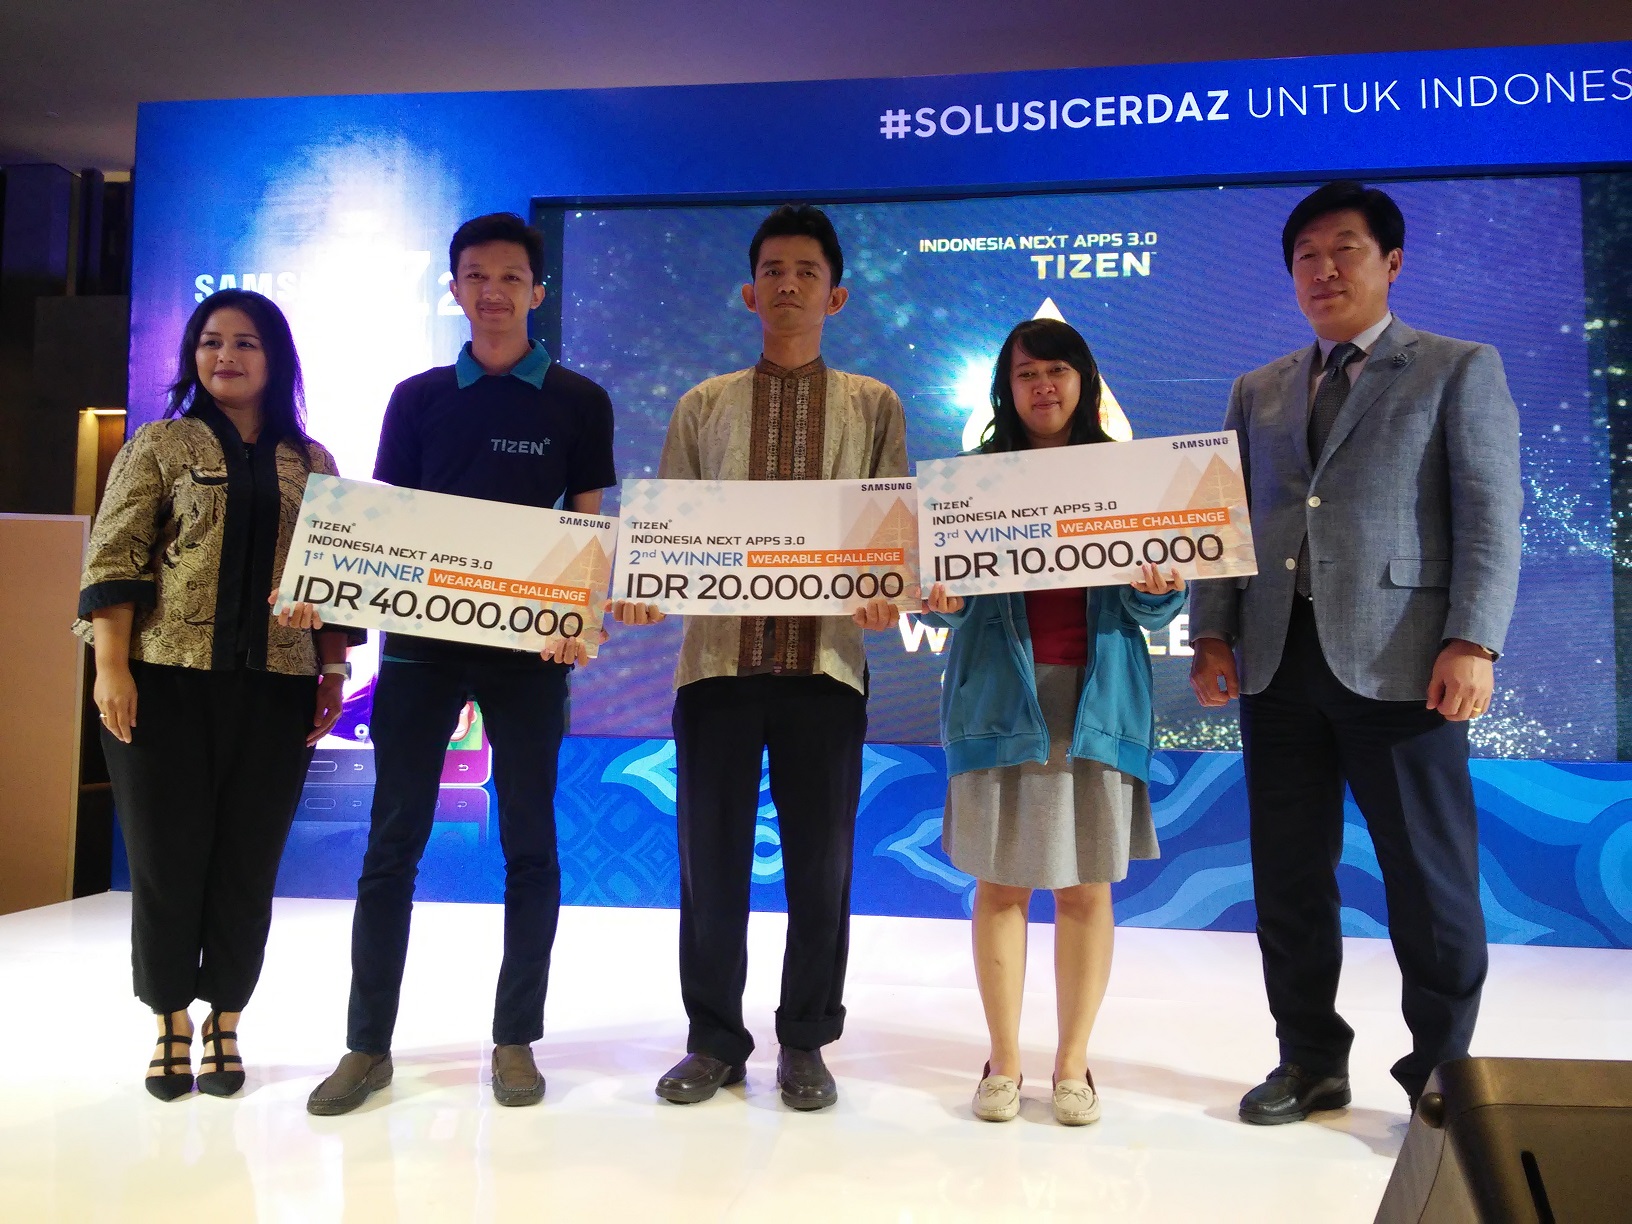 Foto Samsung TIZEN Indonesia Next Apps 3.0 Category: Wearable